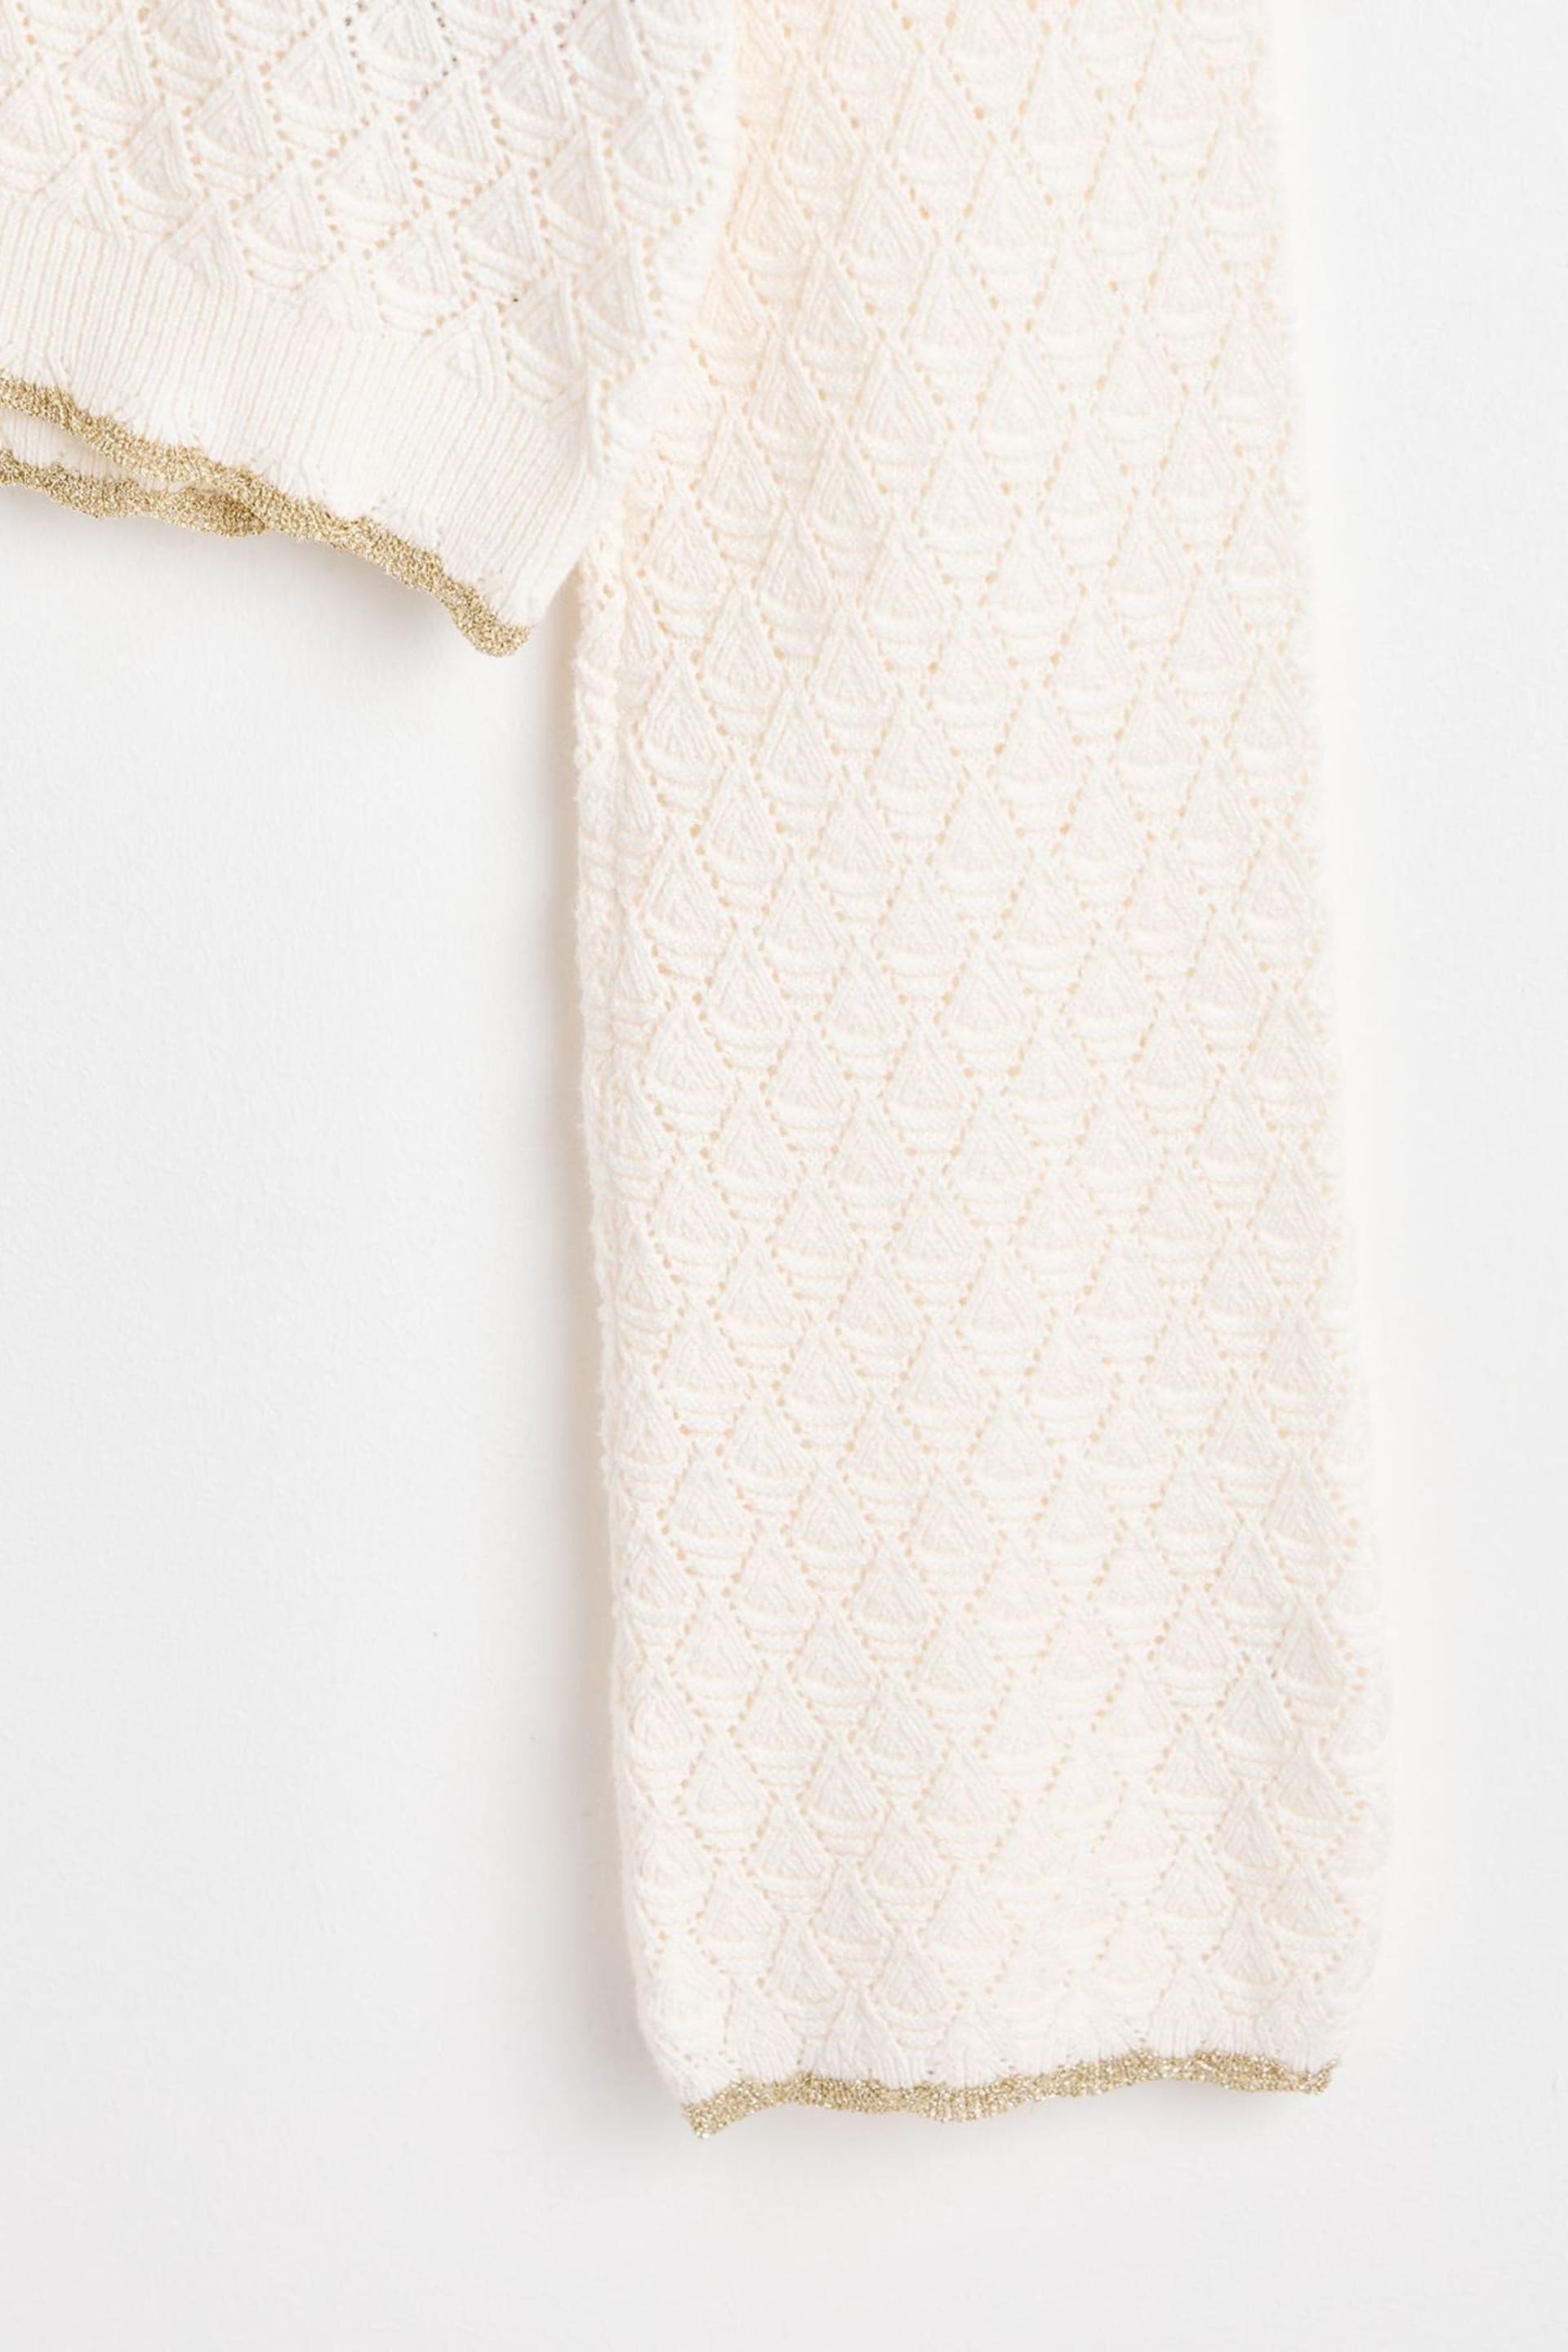 Oliver Bonas White Sparkle Knitted Tie Cardigan - Image 8 of 9